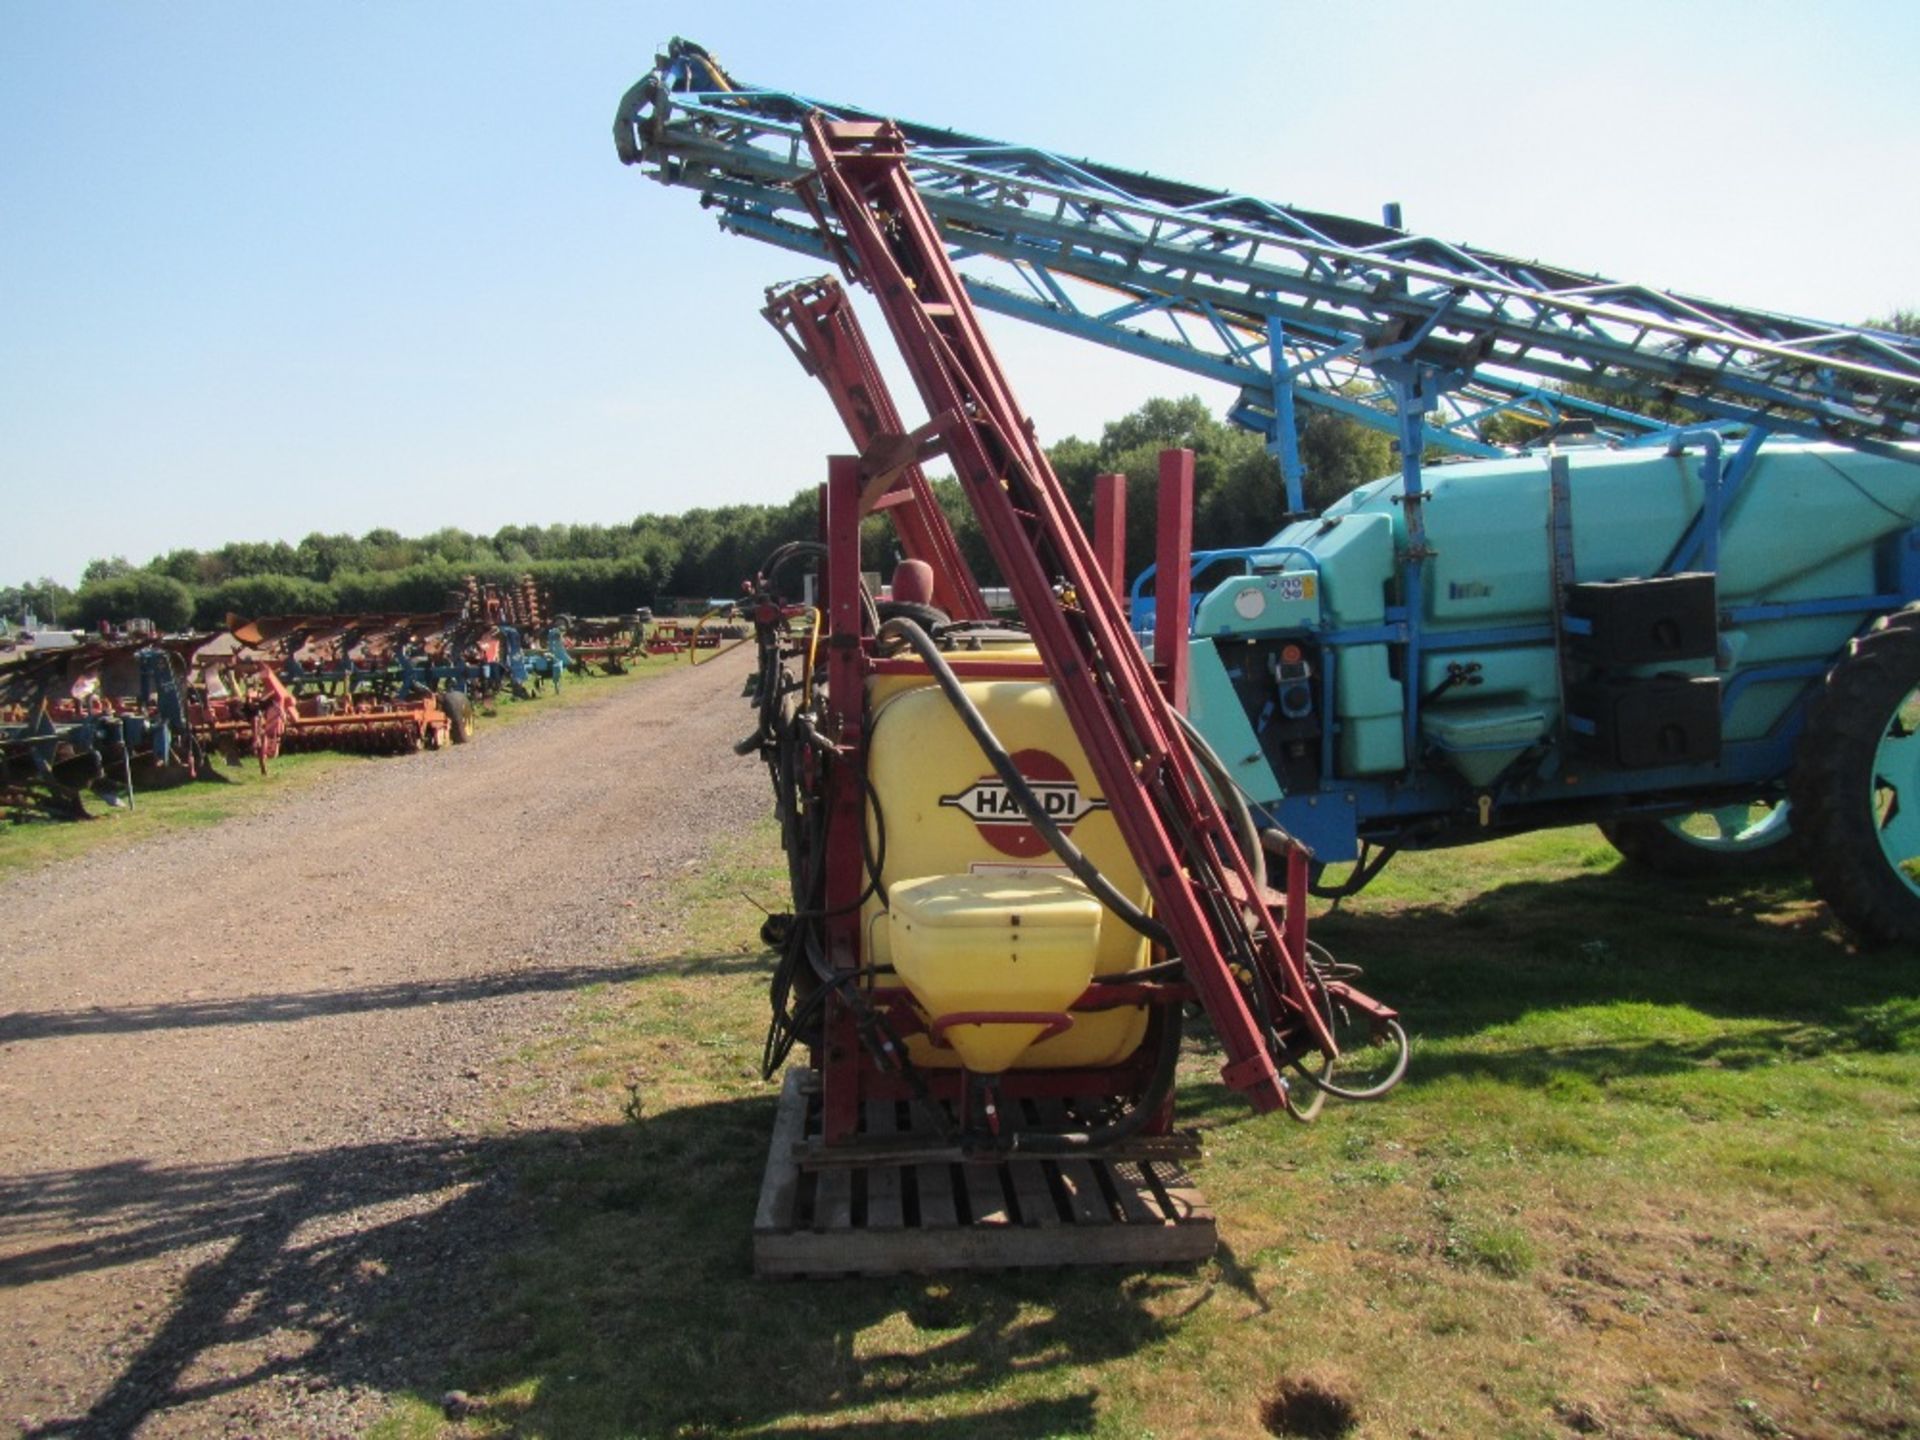 Hardi 12m Sprayer with Hyd Lift, Booms & Induction Hopper - Image 5 of 5